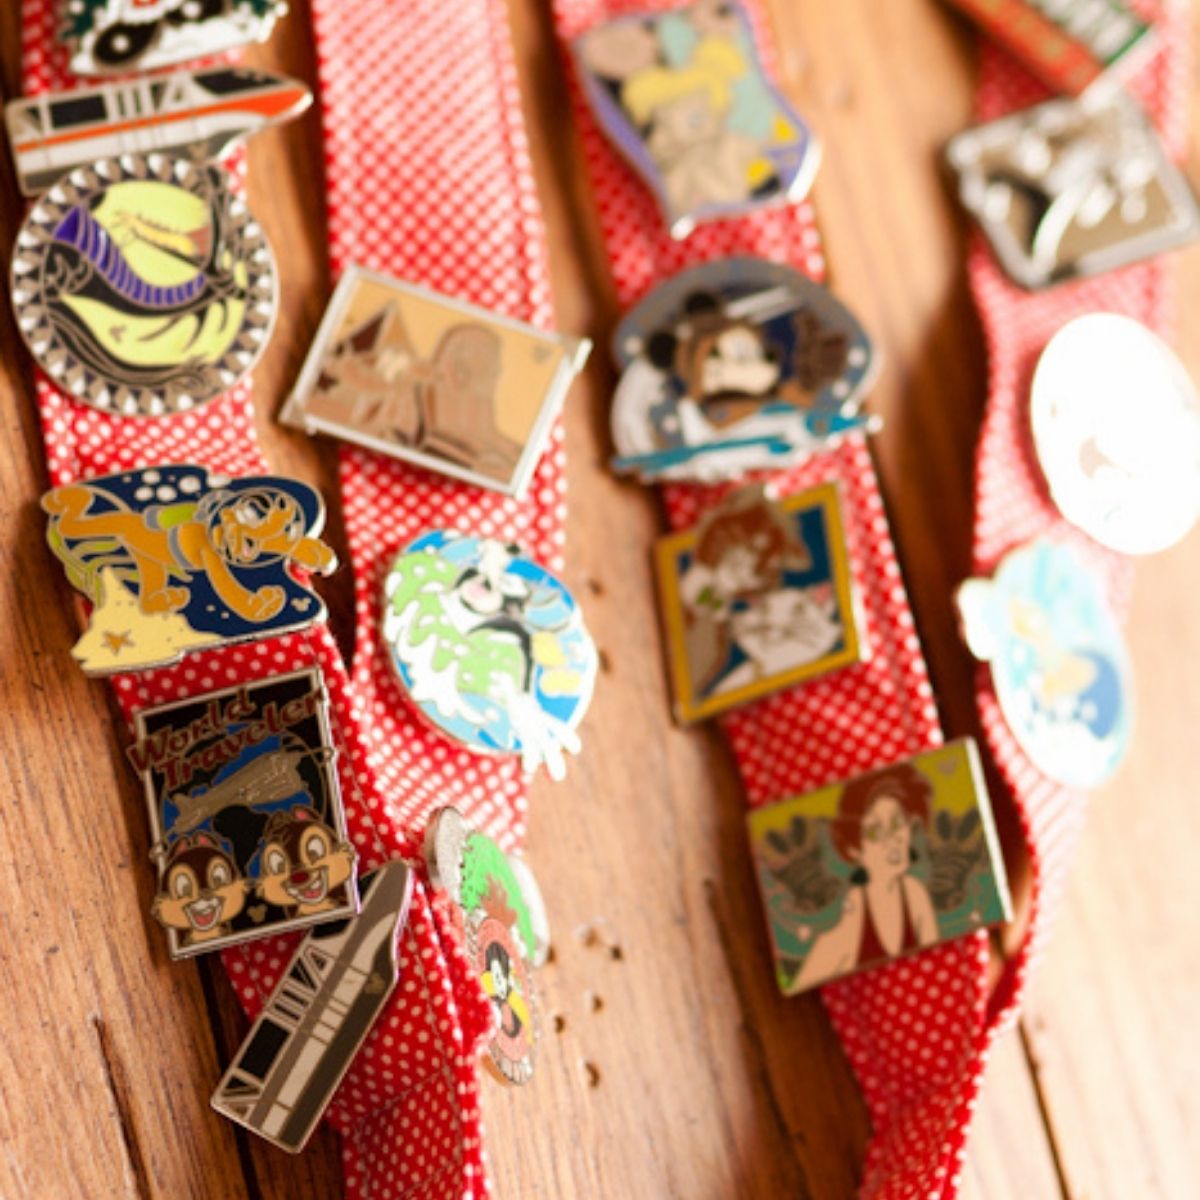 Two red and white polka dot lanyards have Disney pins attached.